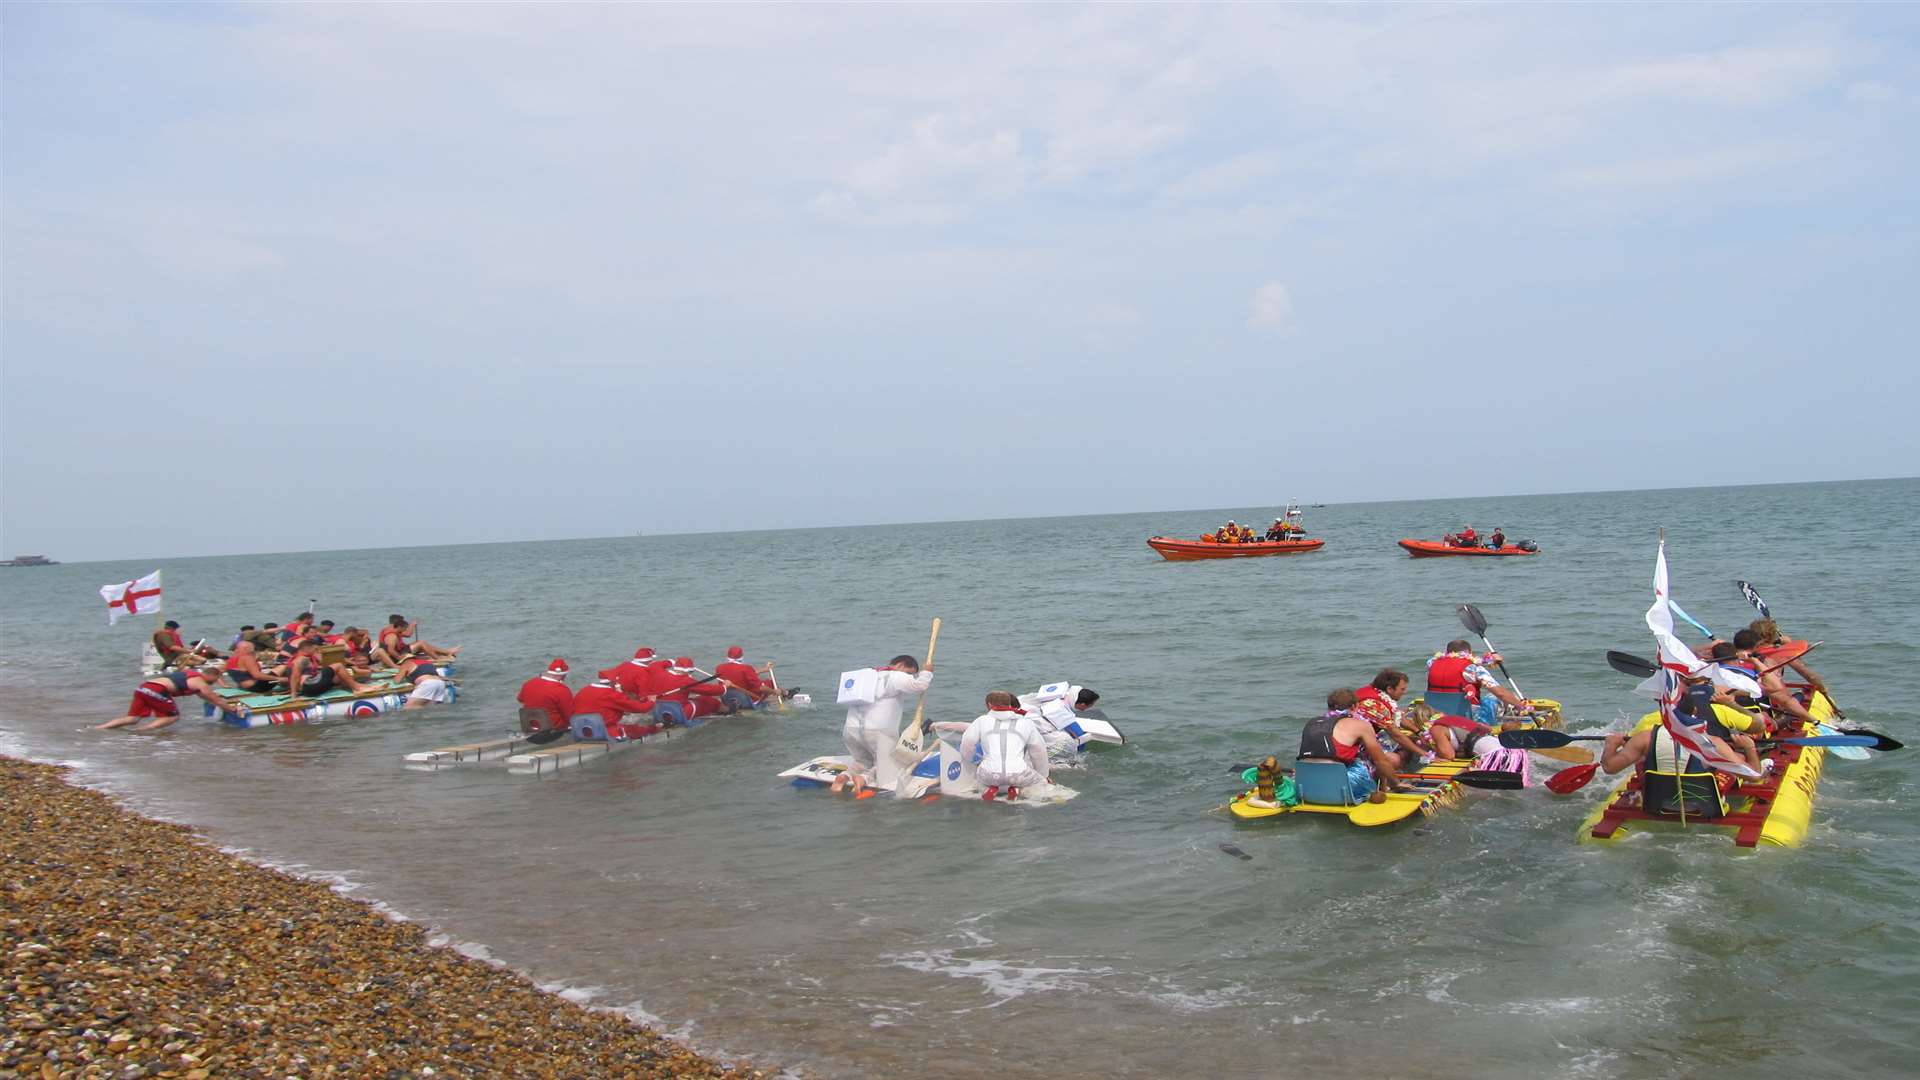 The rafts take to the sea